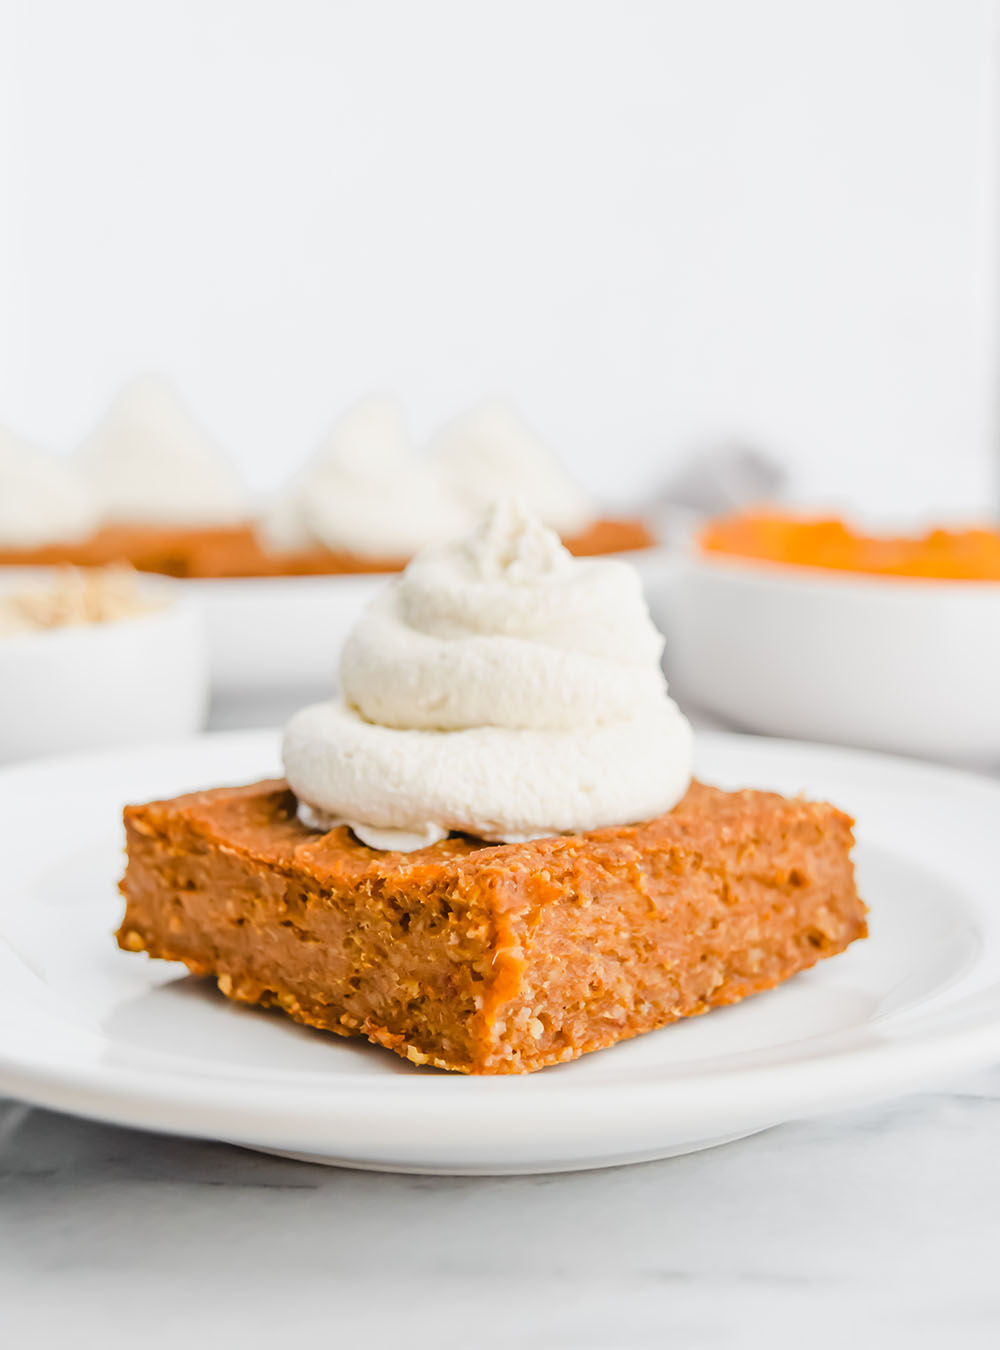 Vegan Pumpkin Spice Bars with Cream Cheese Frosting